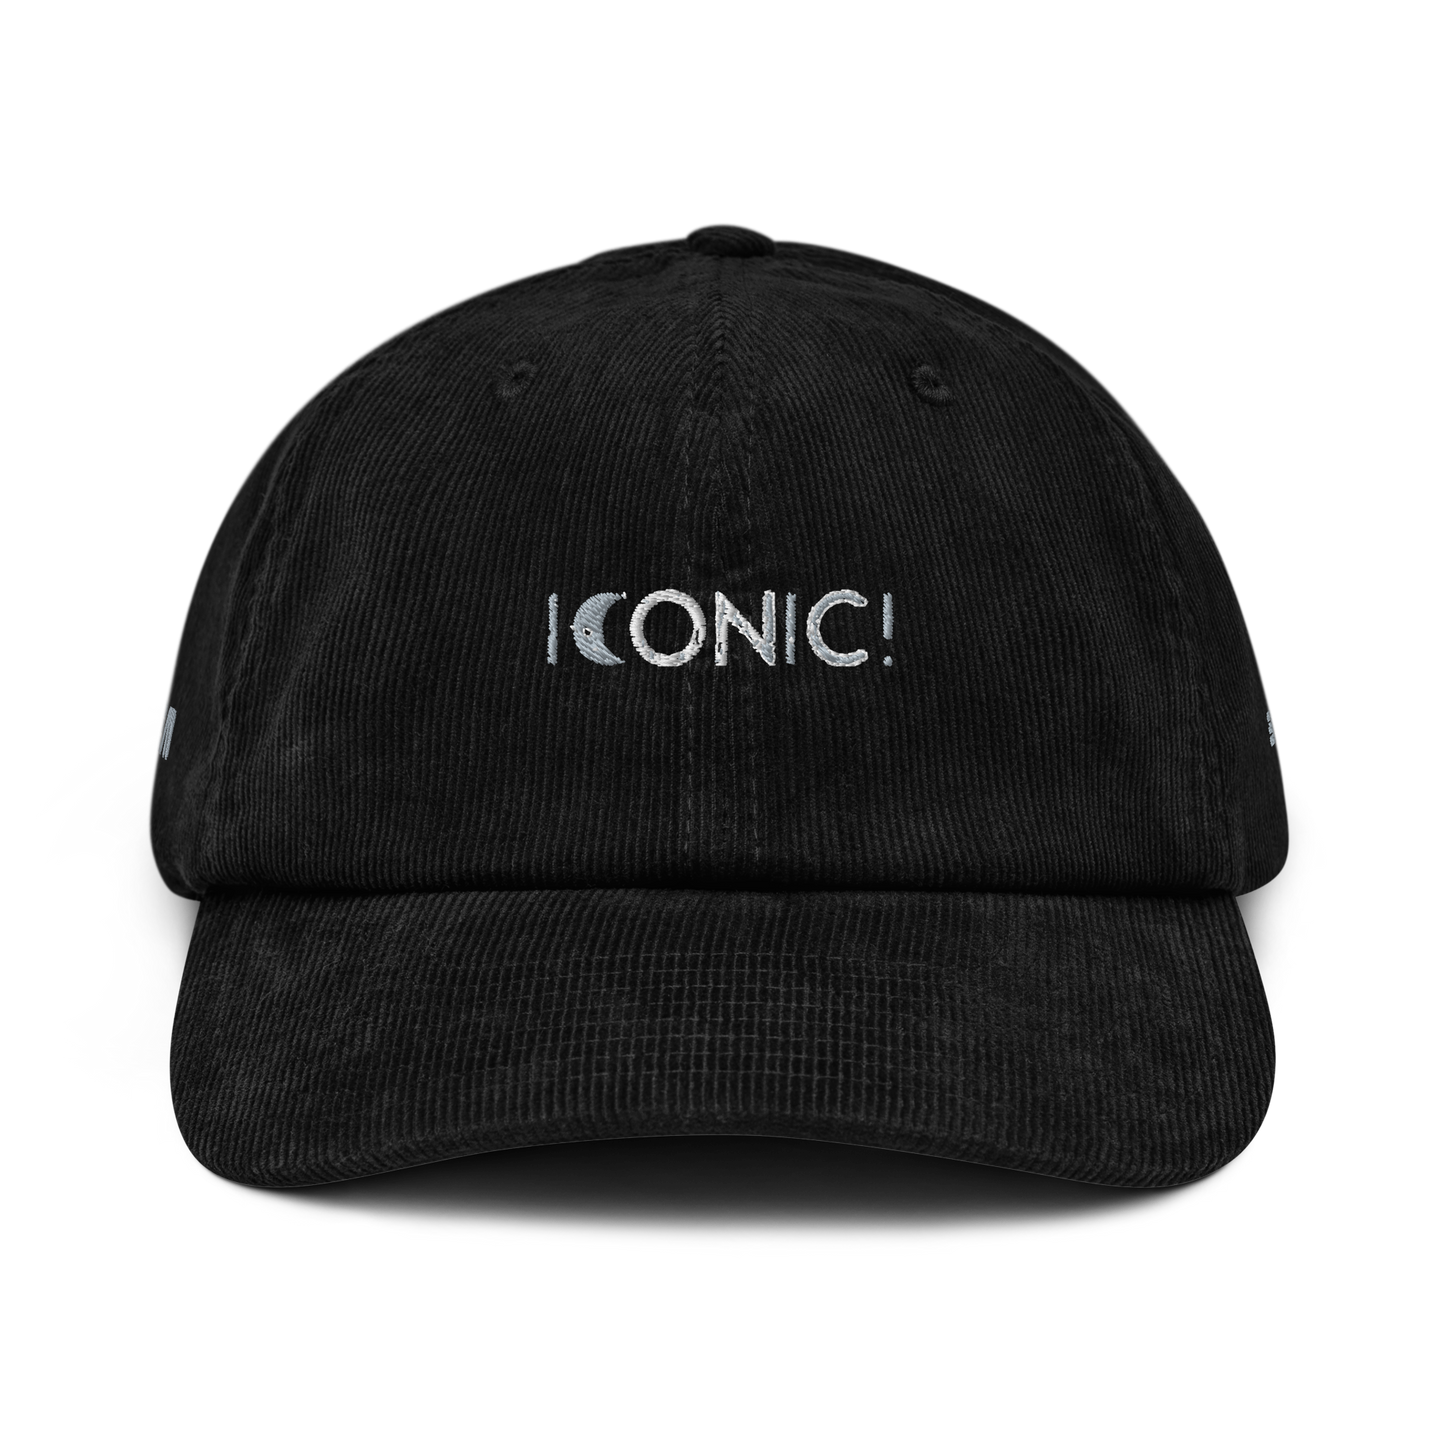 Iconic! Embroidered Corduroy Hat